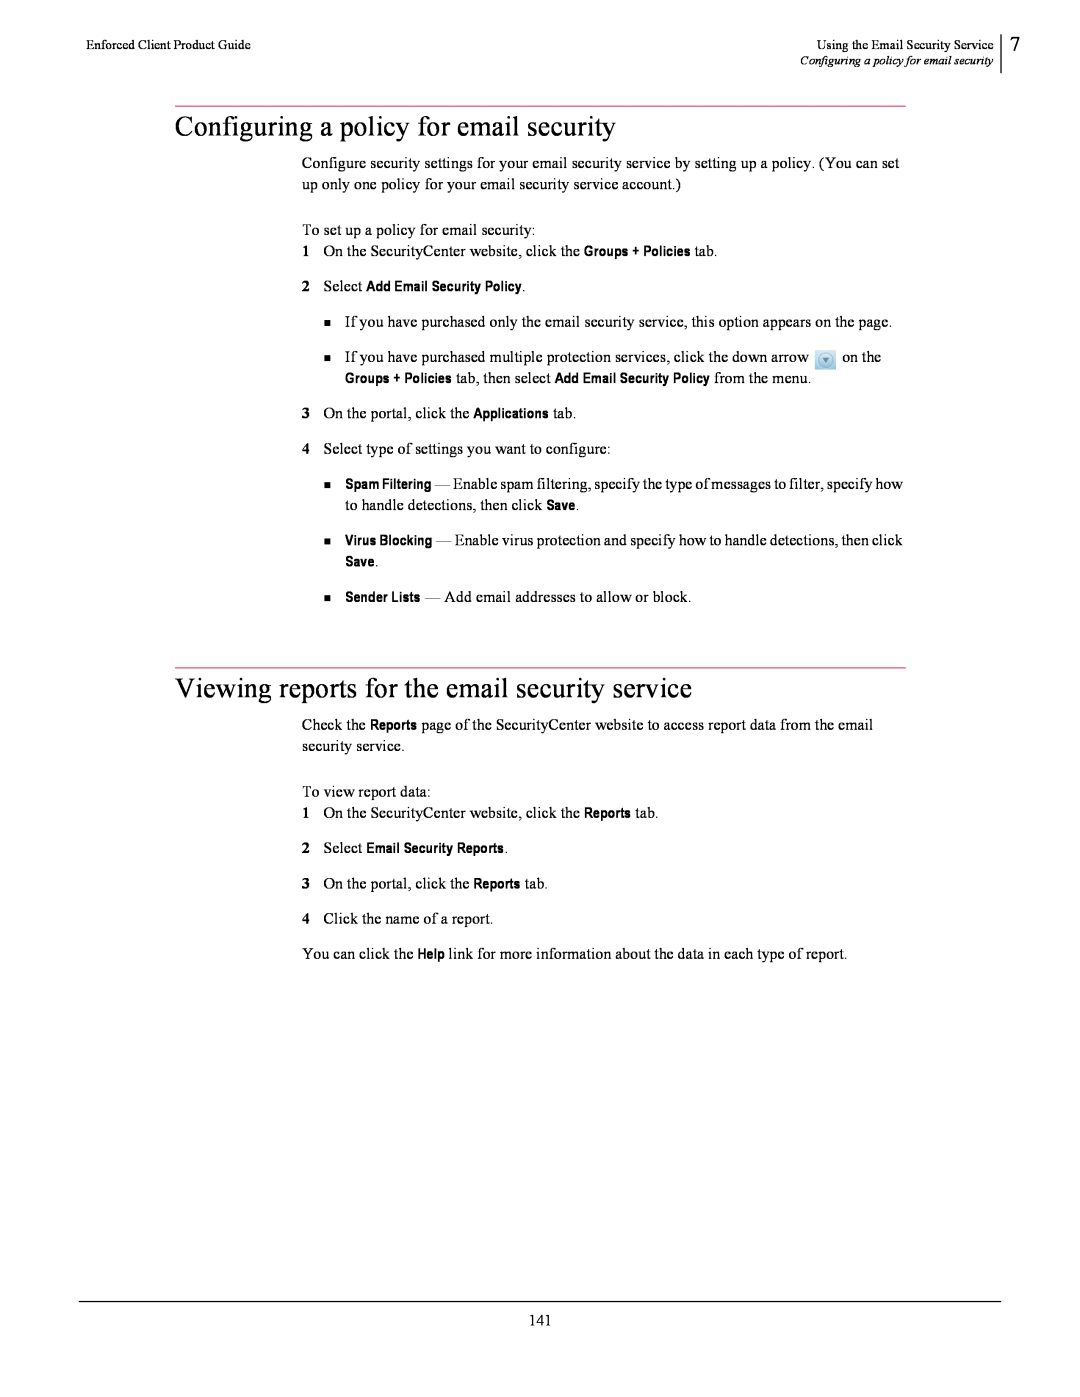 SonicWALL 4.5 manual Configuring a policy for email security, Viewing reports for the email security service 